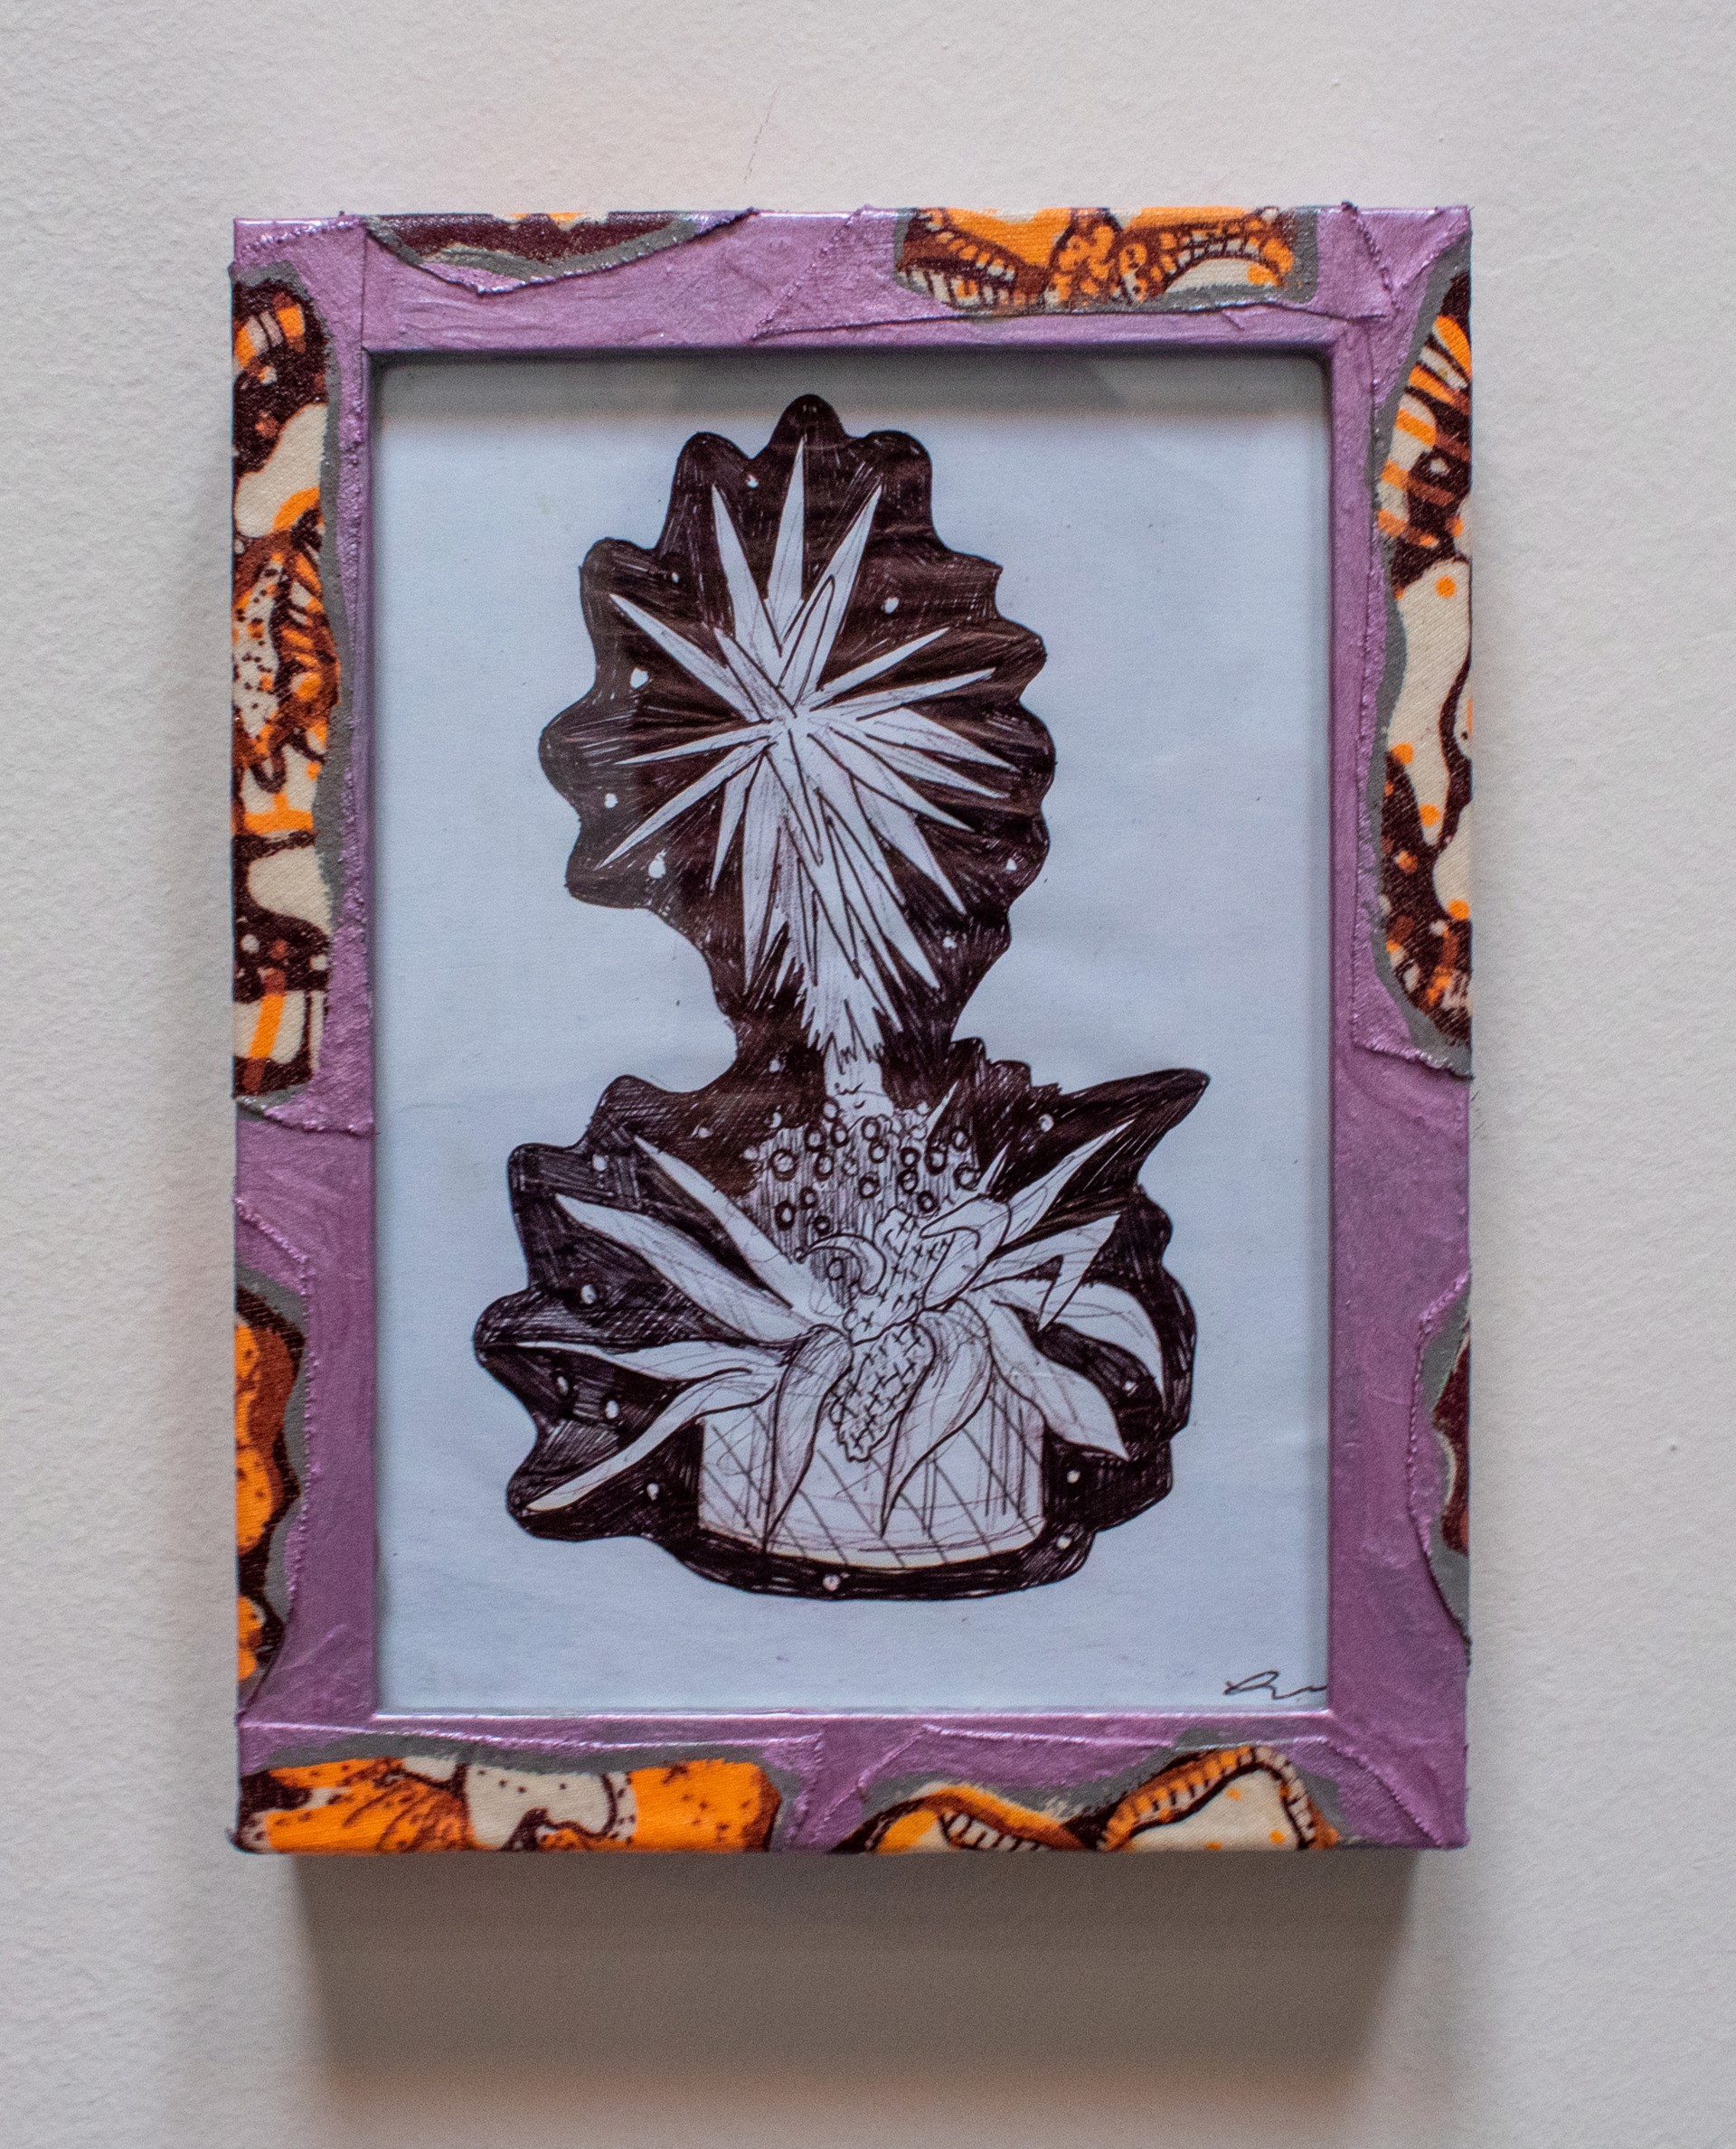 Wall Flower #1 by Laurie Shapiro